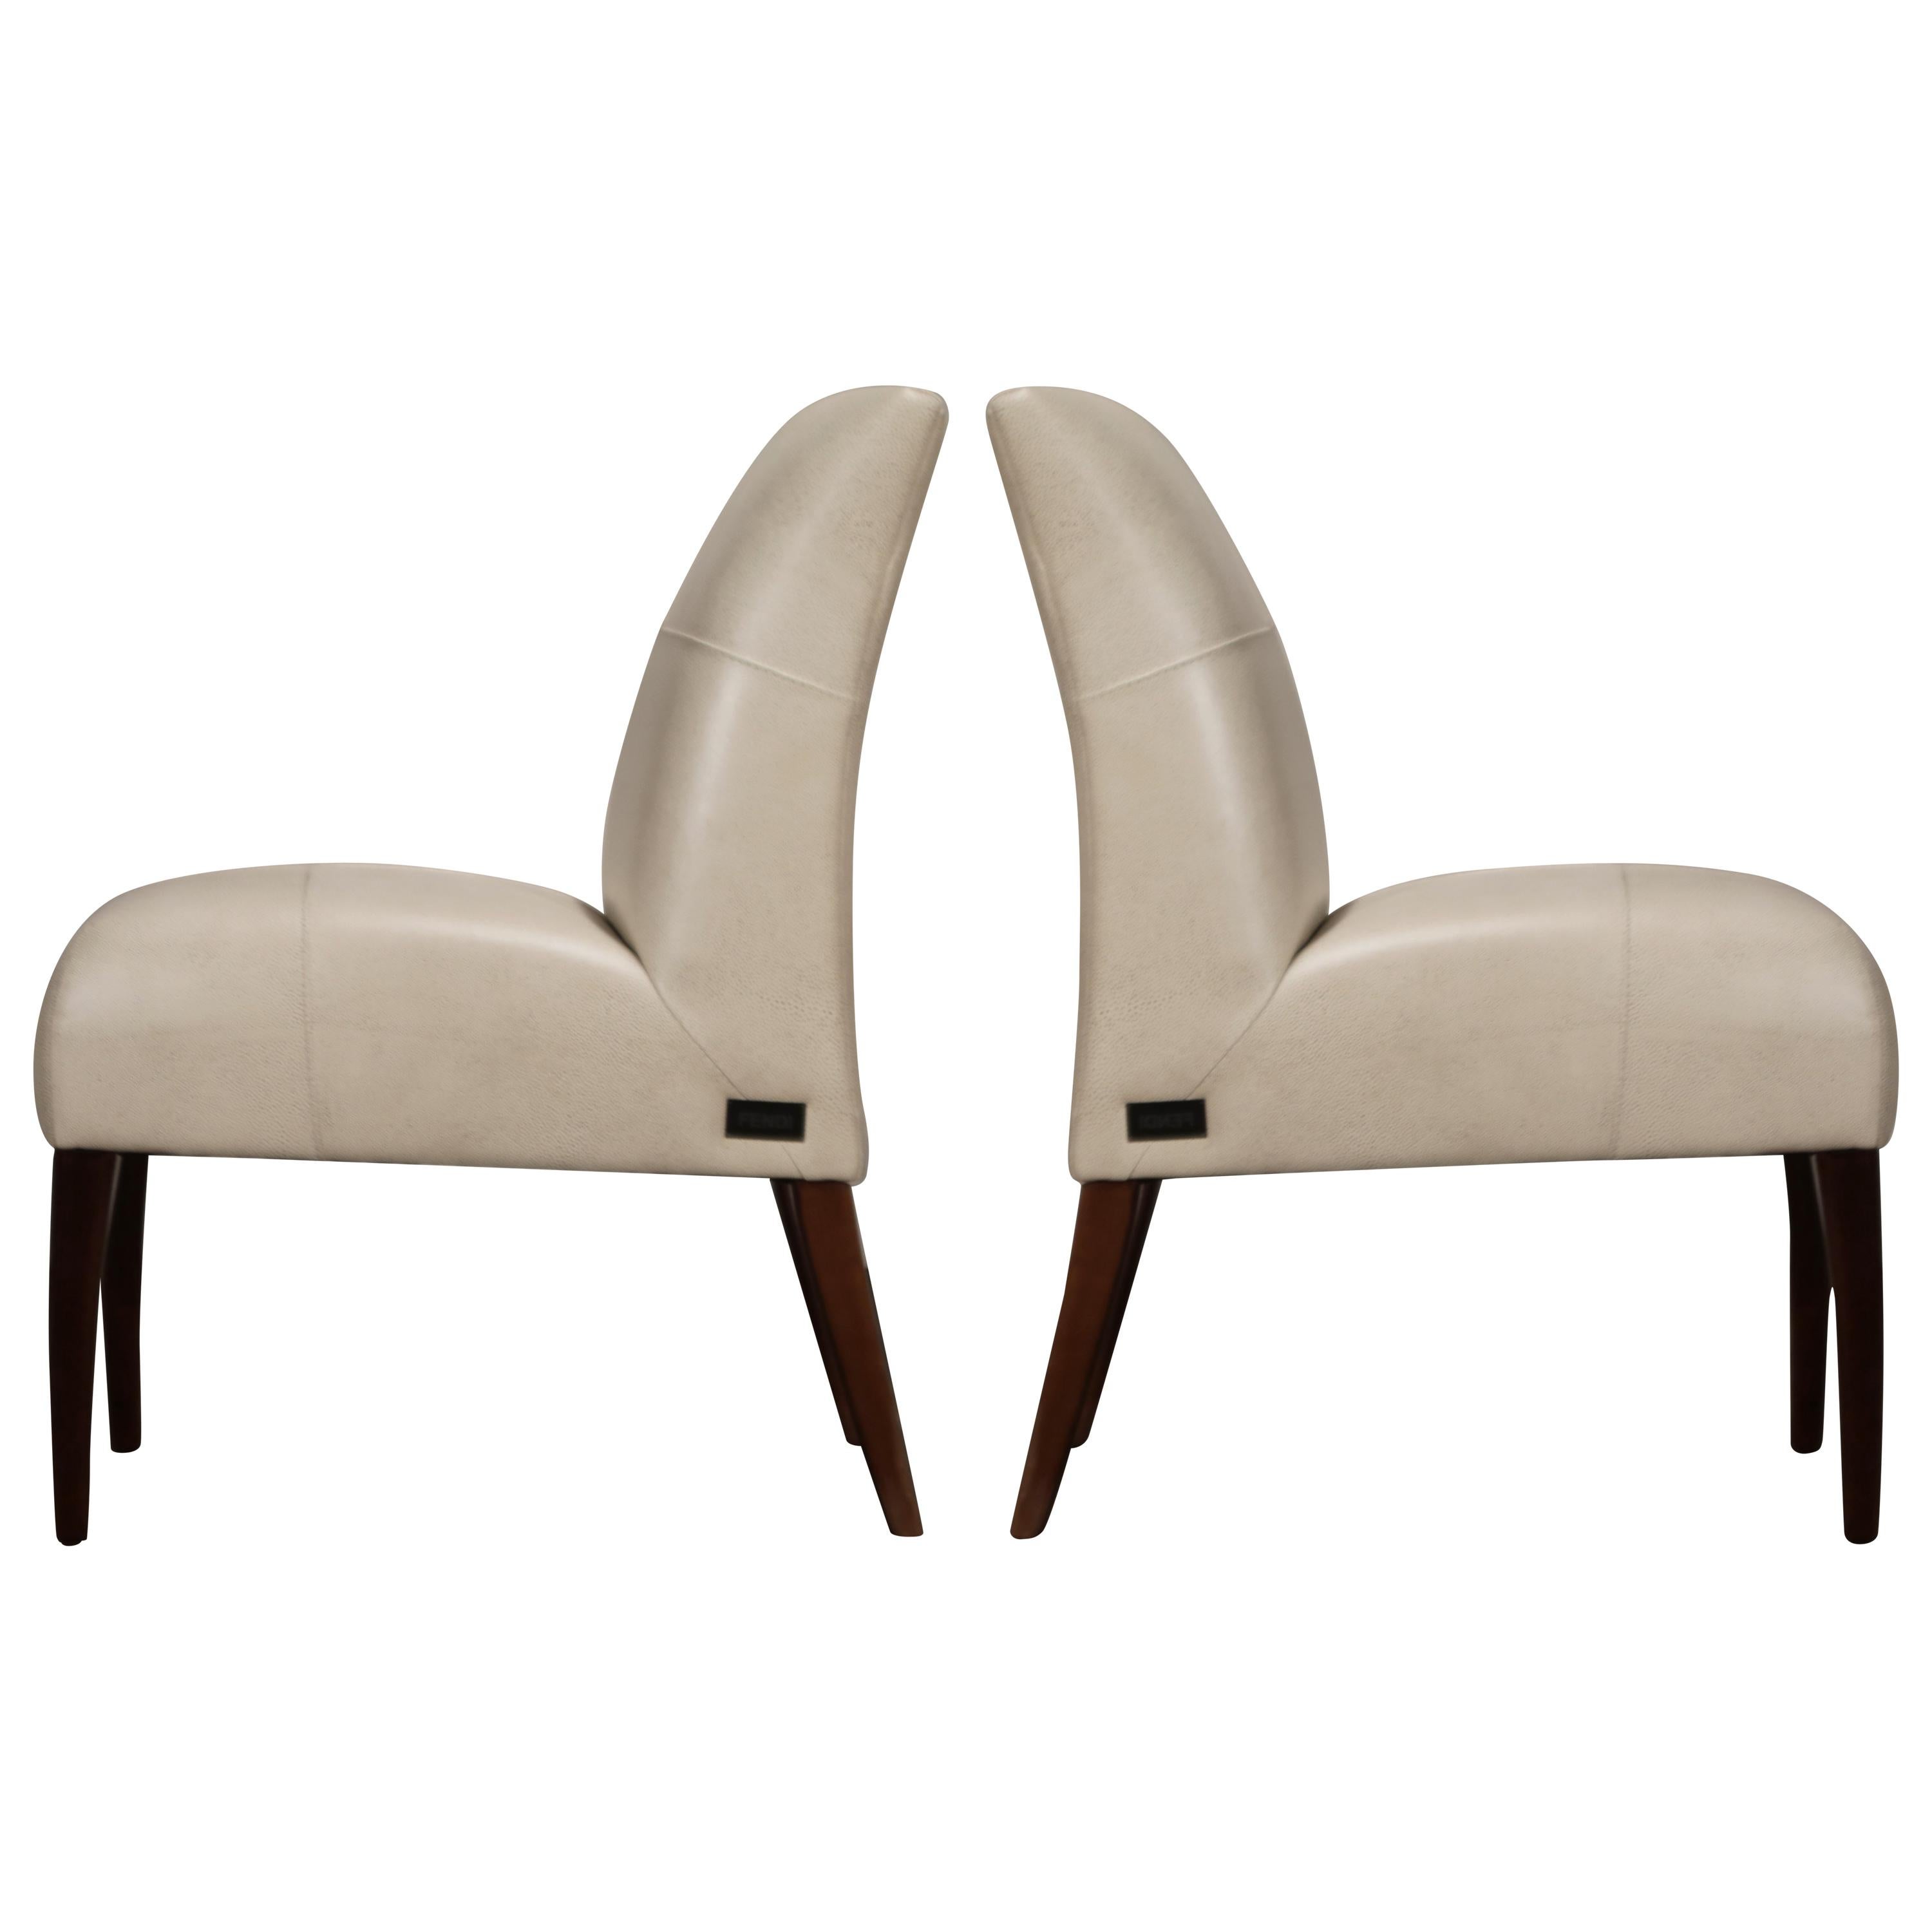 White and Gold Speck Shagreen Leather Side Chairs by Fendi Casa